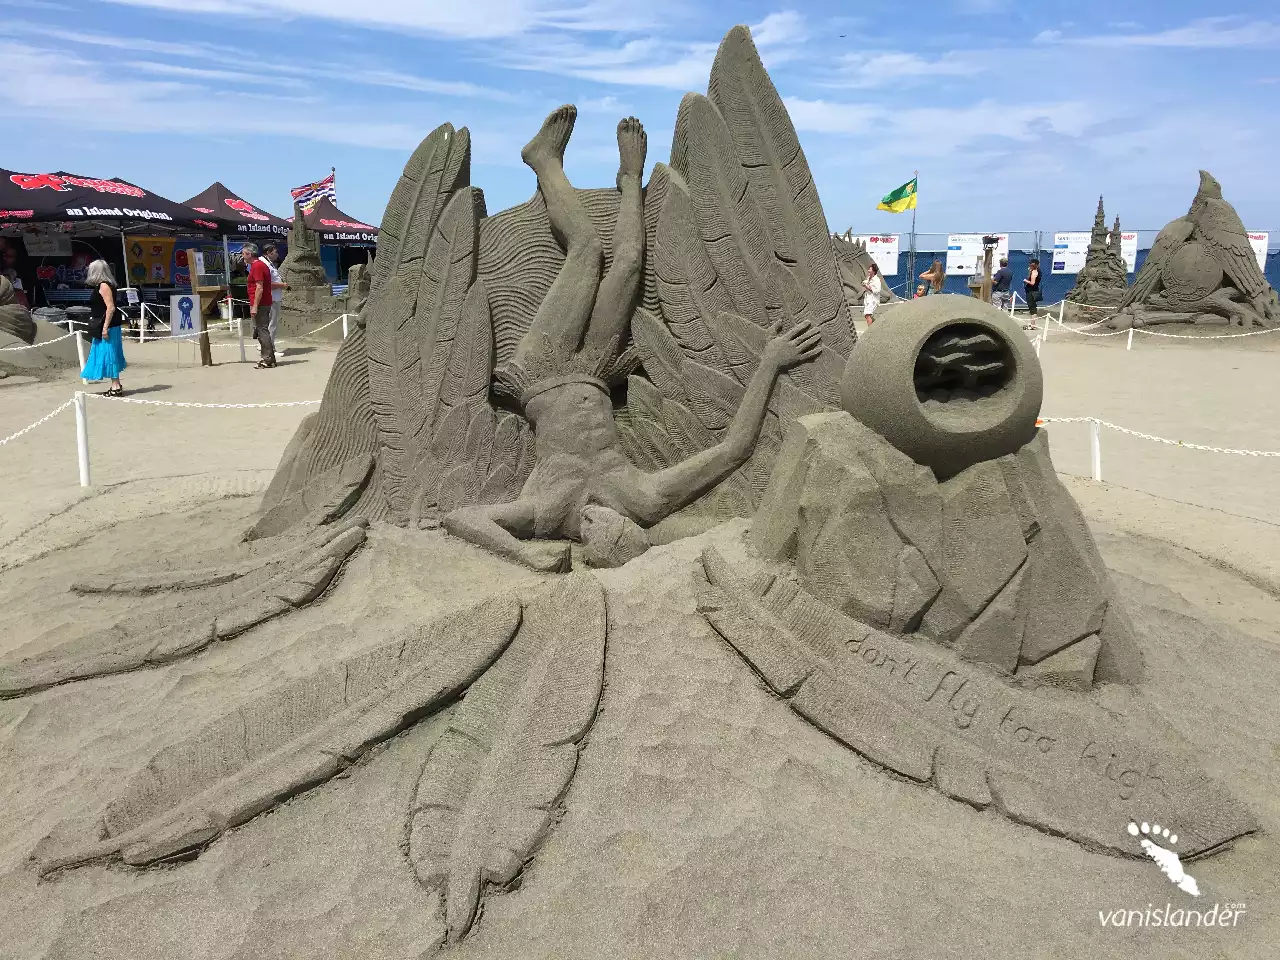 Sand Sculpture of a man falling down - Parksville Festival, Vancouver Island